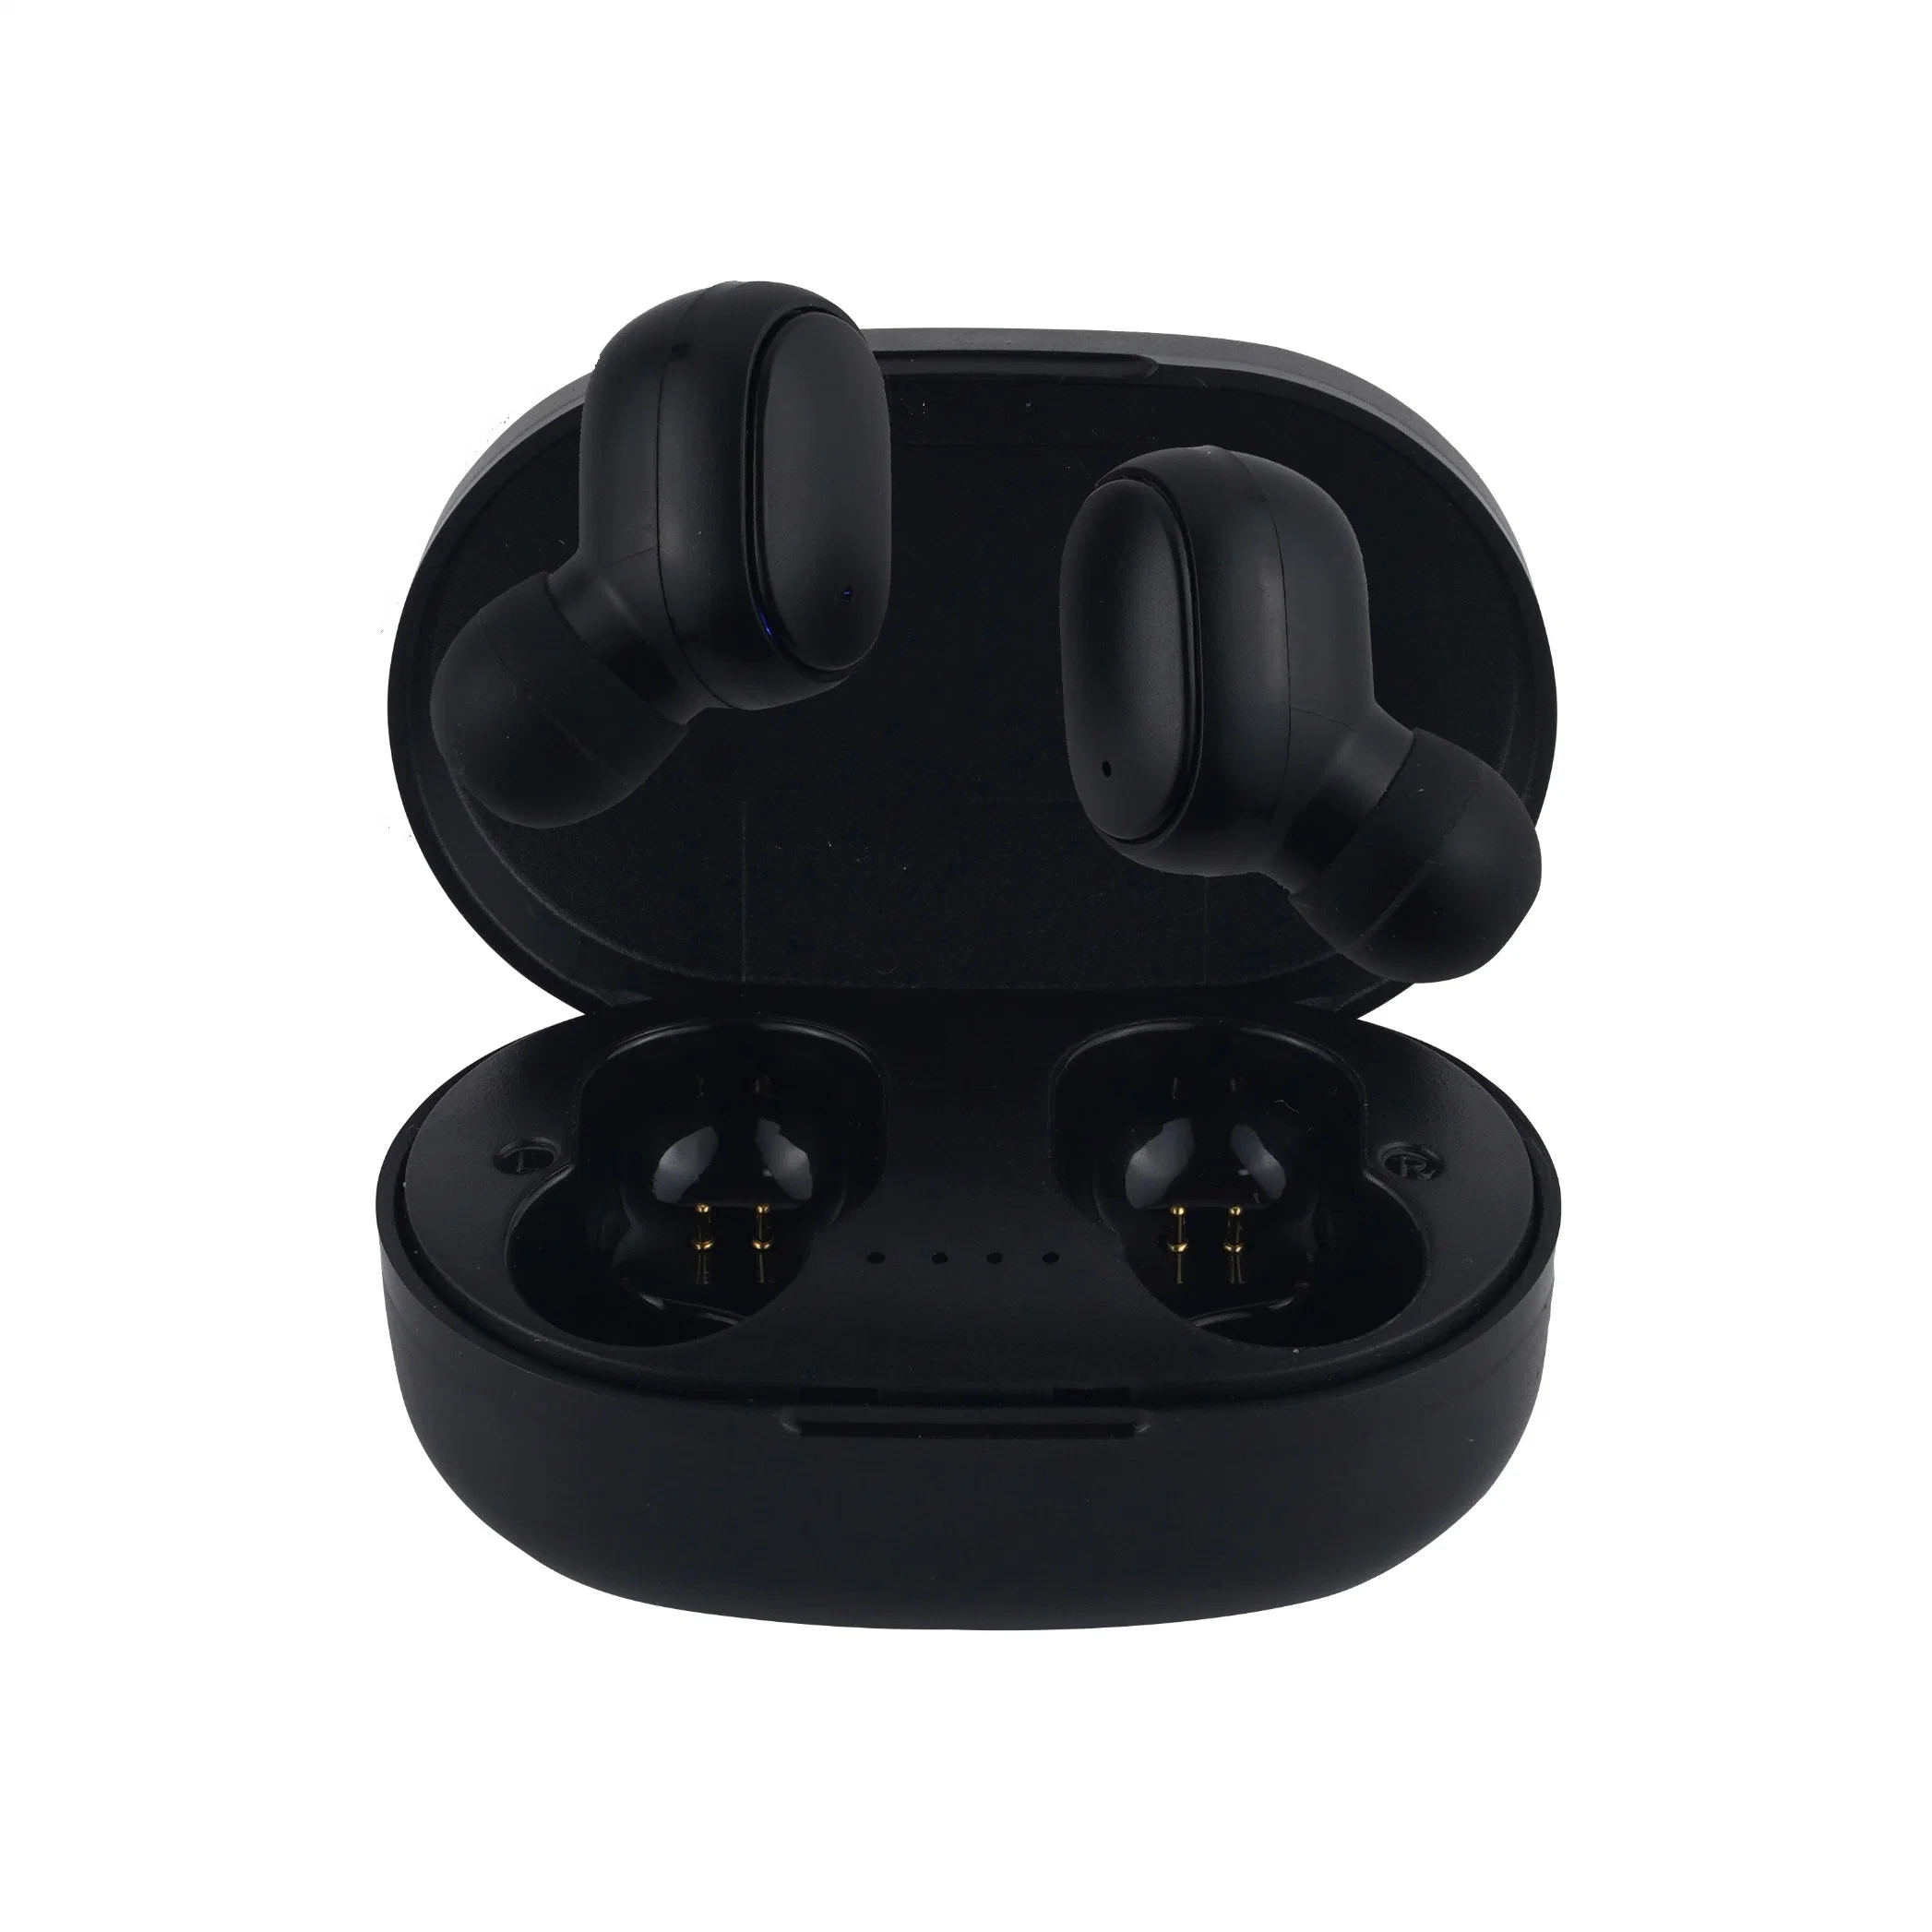 Free Samples PRO Binaural Headphone Tws Stereo Headset Gaming in-Ear Earplugs Wireless Earbuds with Mobile Phone for 85183000 for Earphone